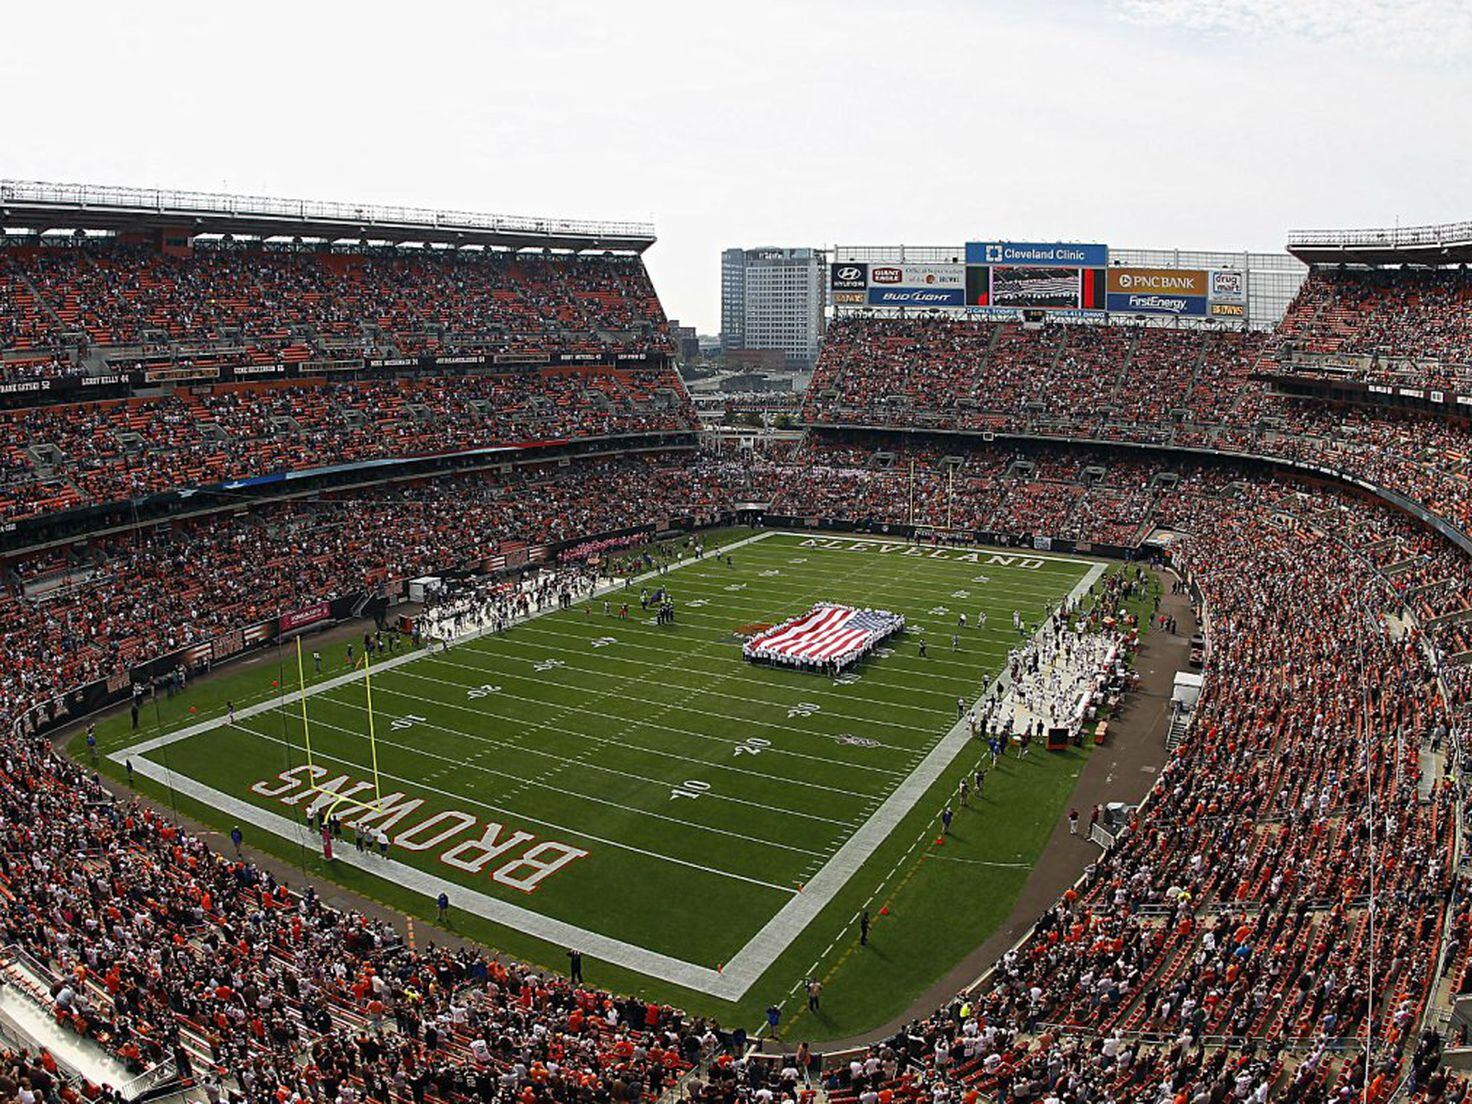 Golf cart driver does donuts in Cleveland Browns stadium, damaging